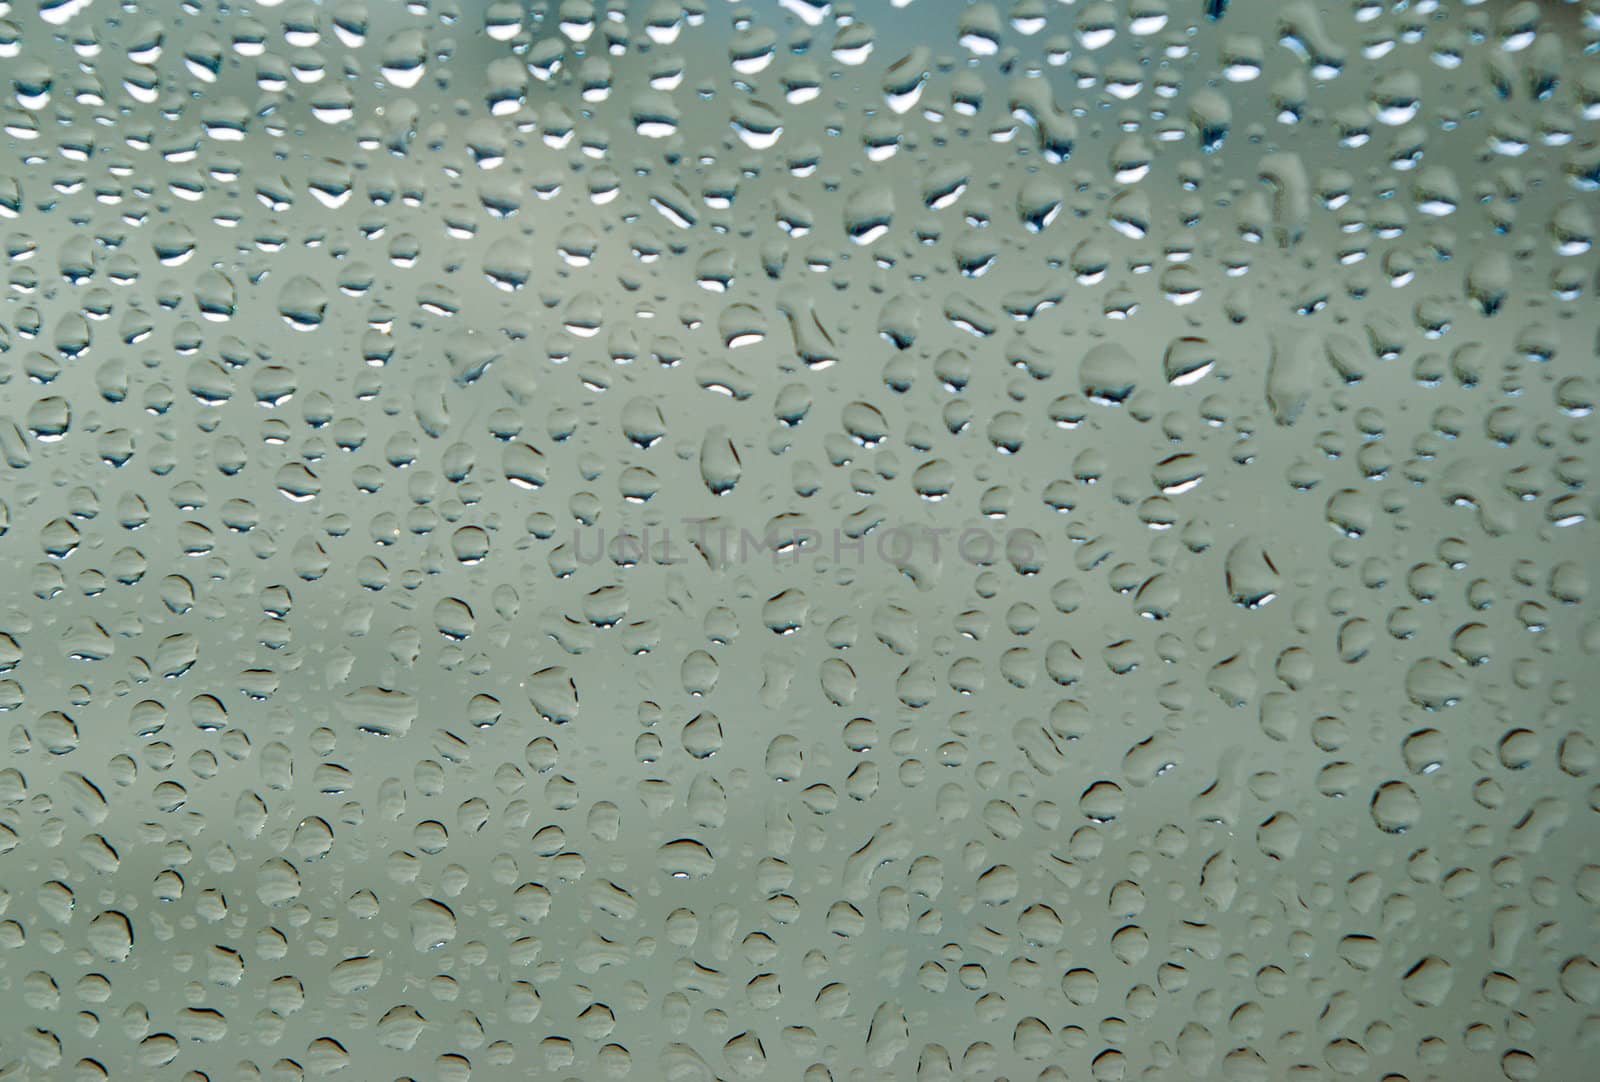 rain drops on glass textured background,Close-up